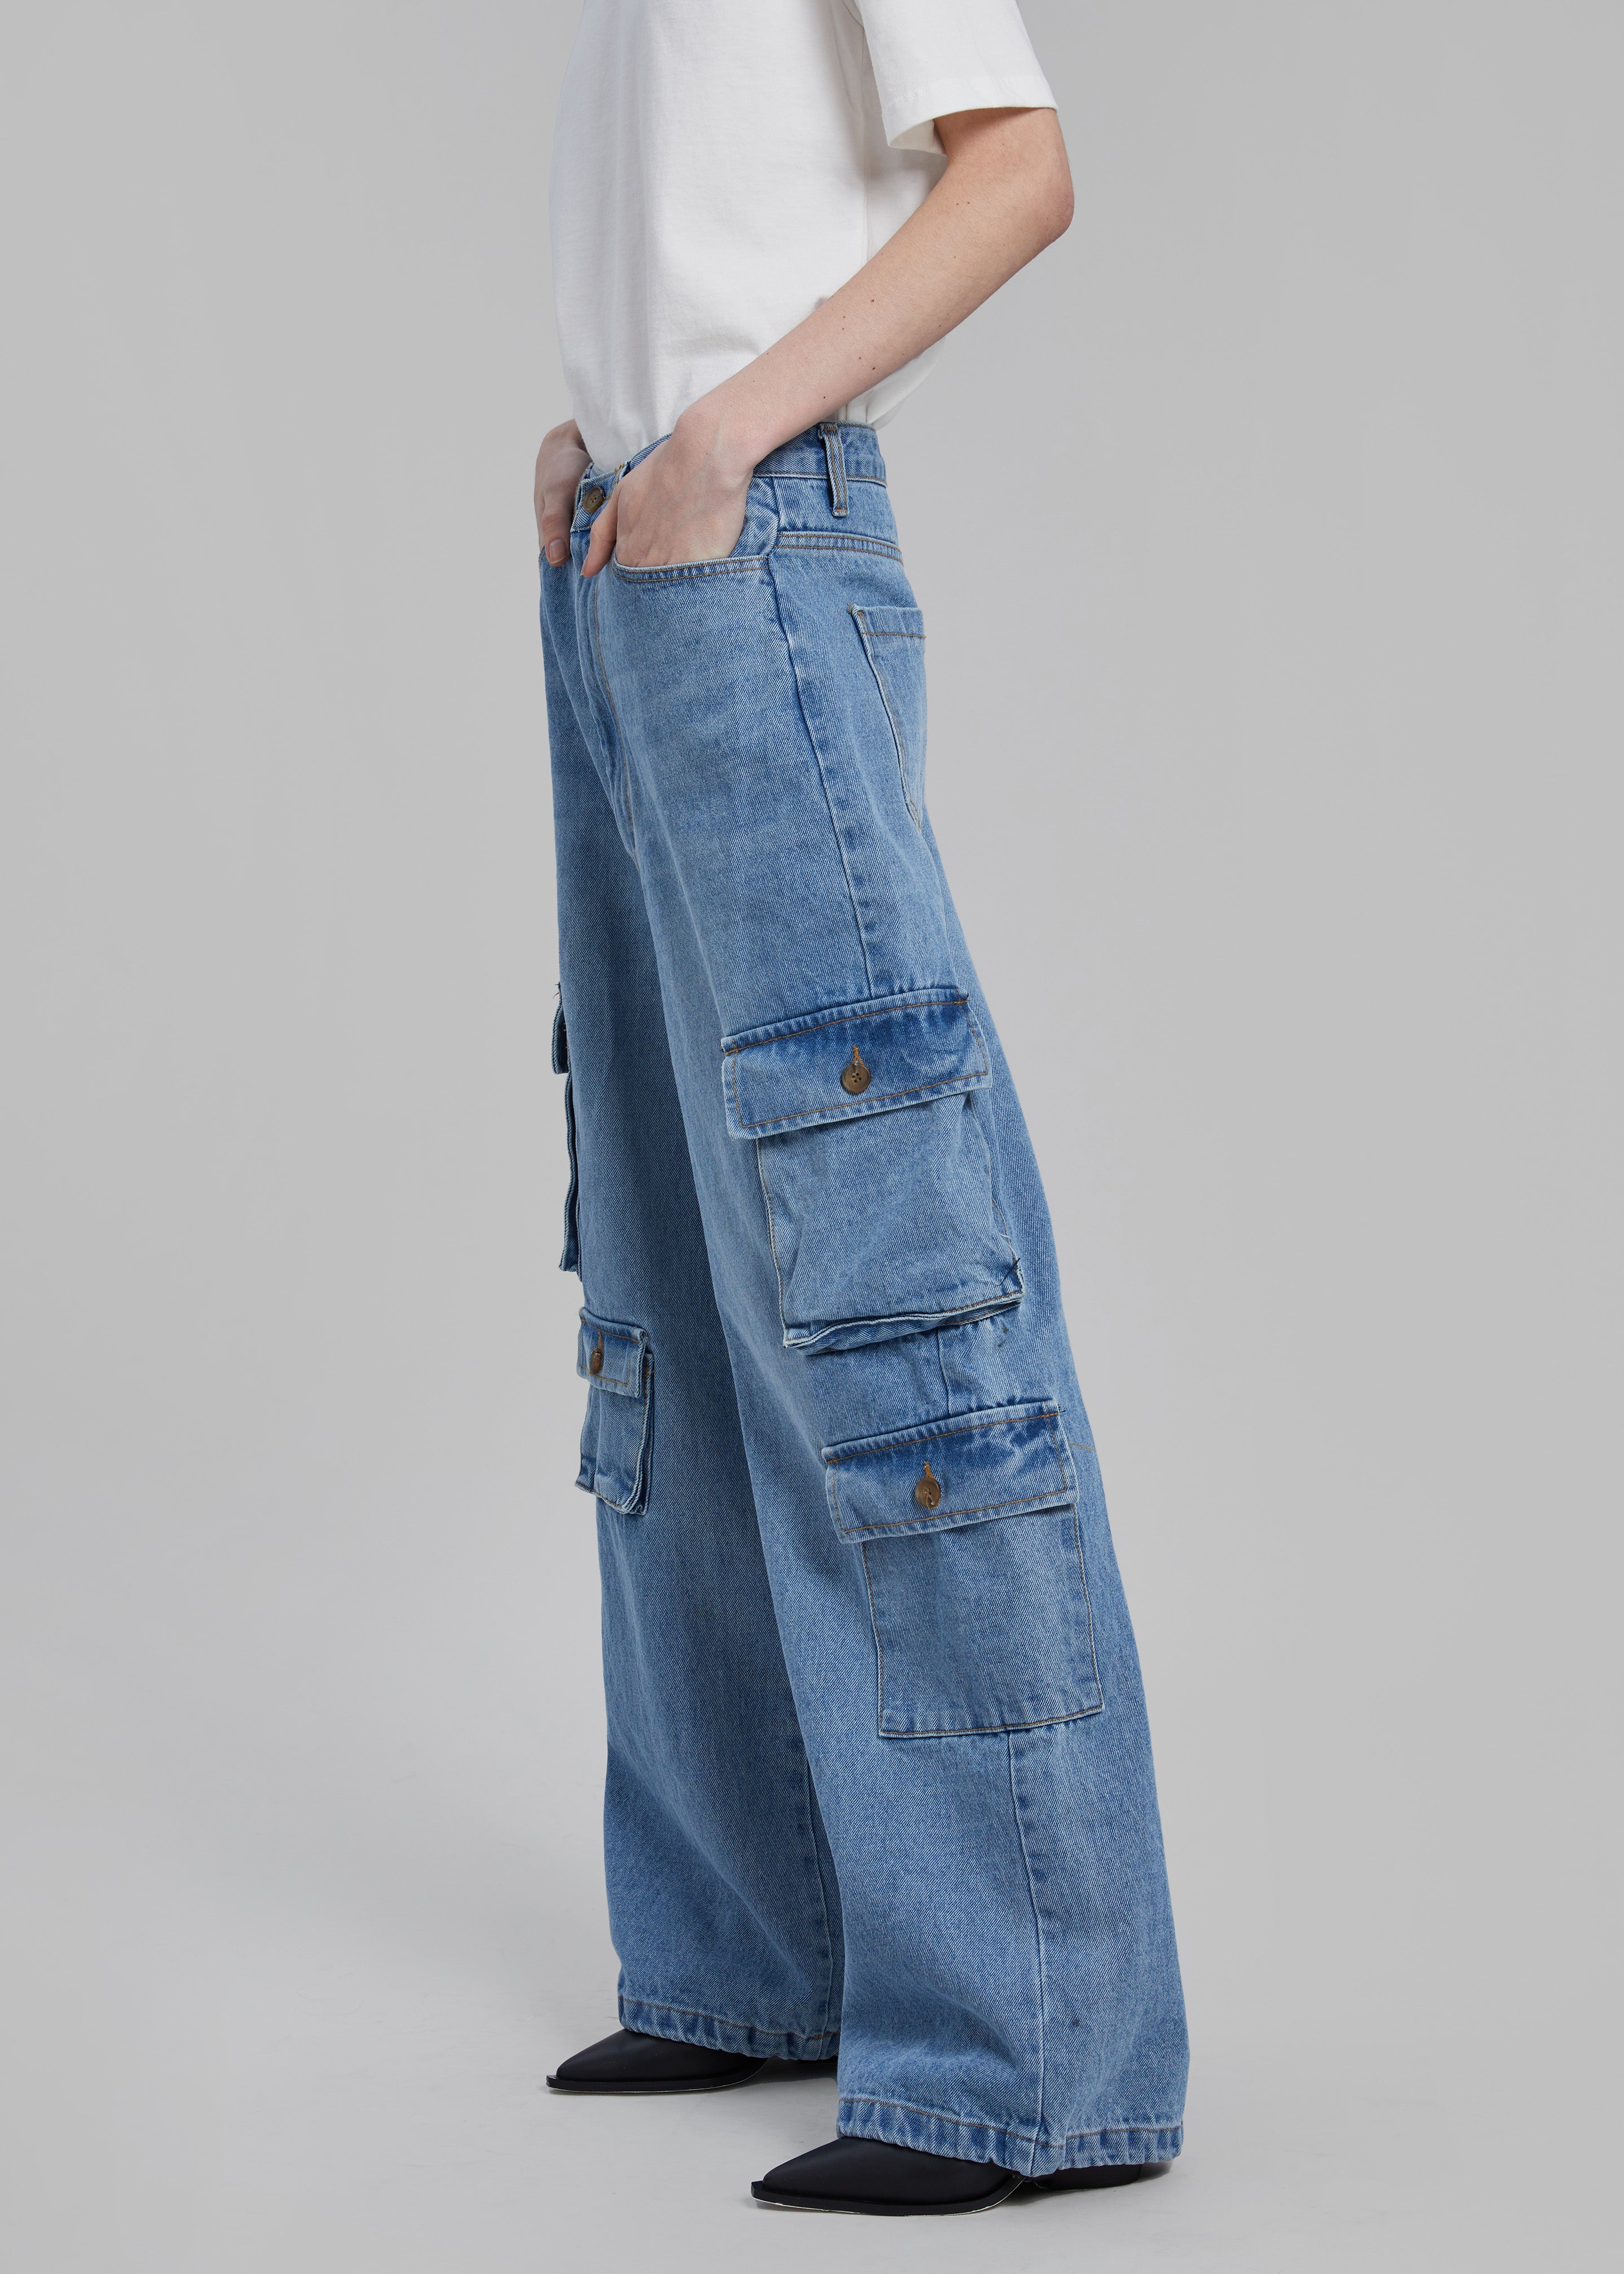 Hailey high-rise denim cargo pants in white - The Frankie Shop